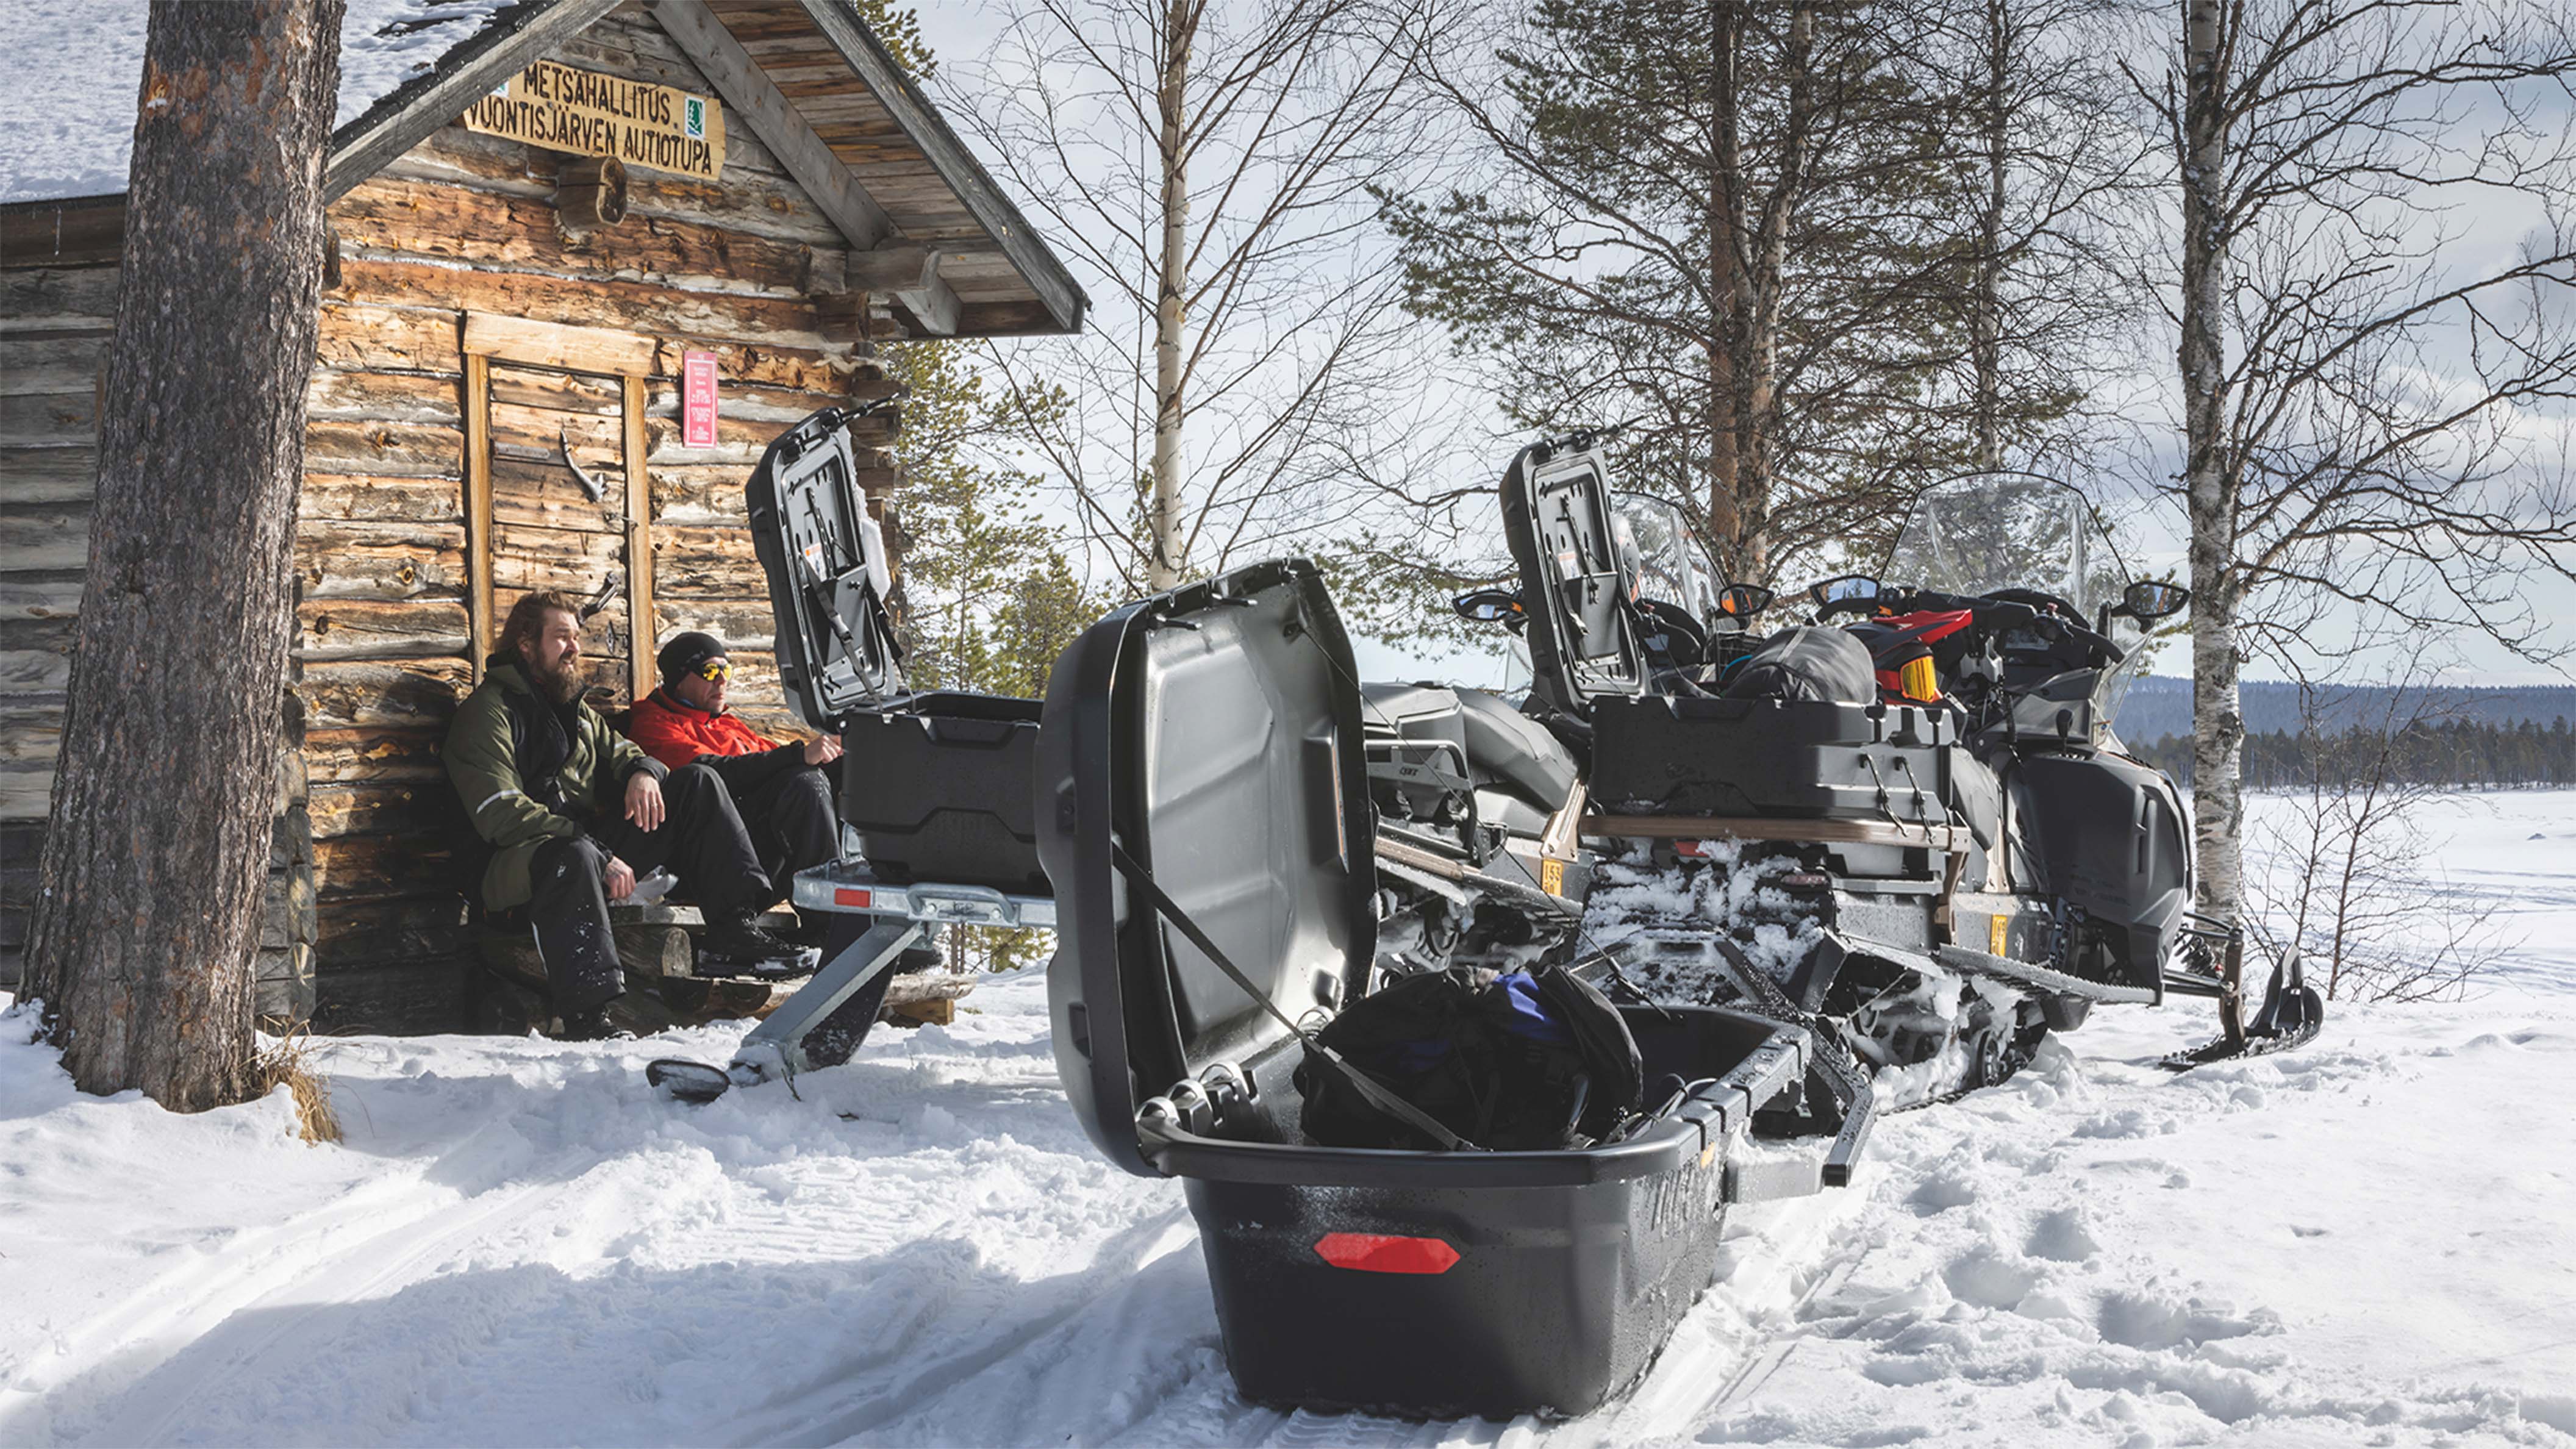 Two snowmobile riders are having a break at the wilderness hut